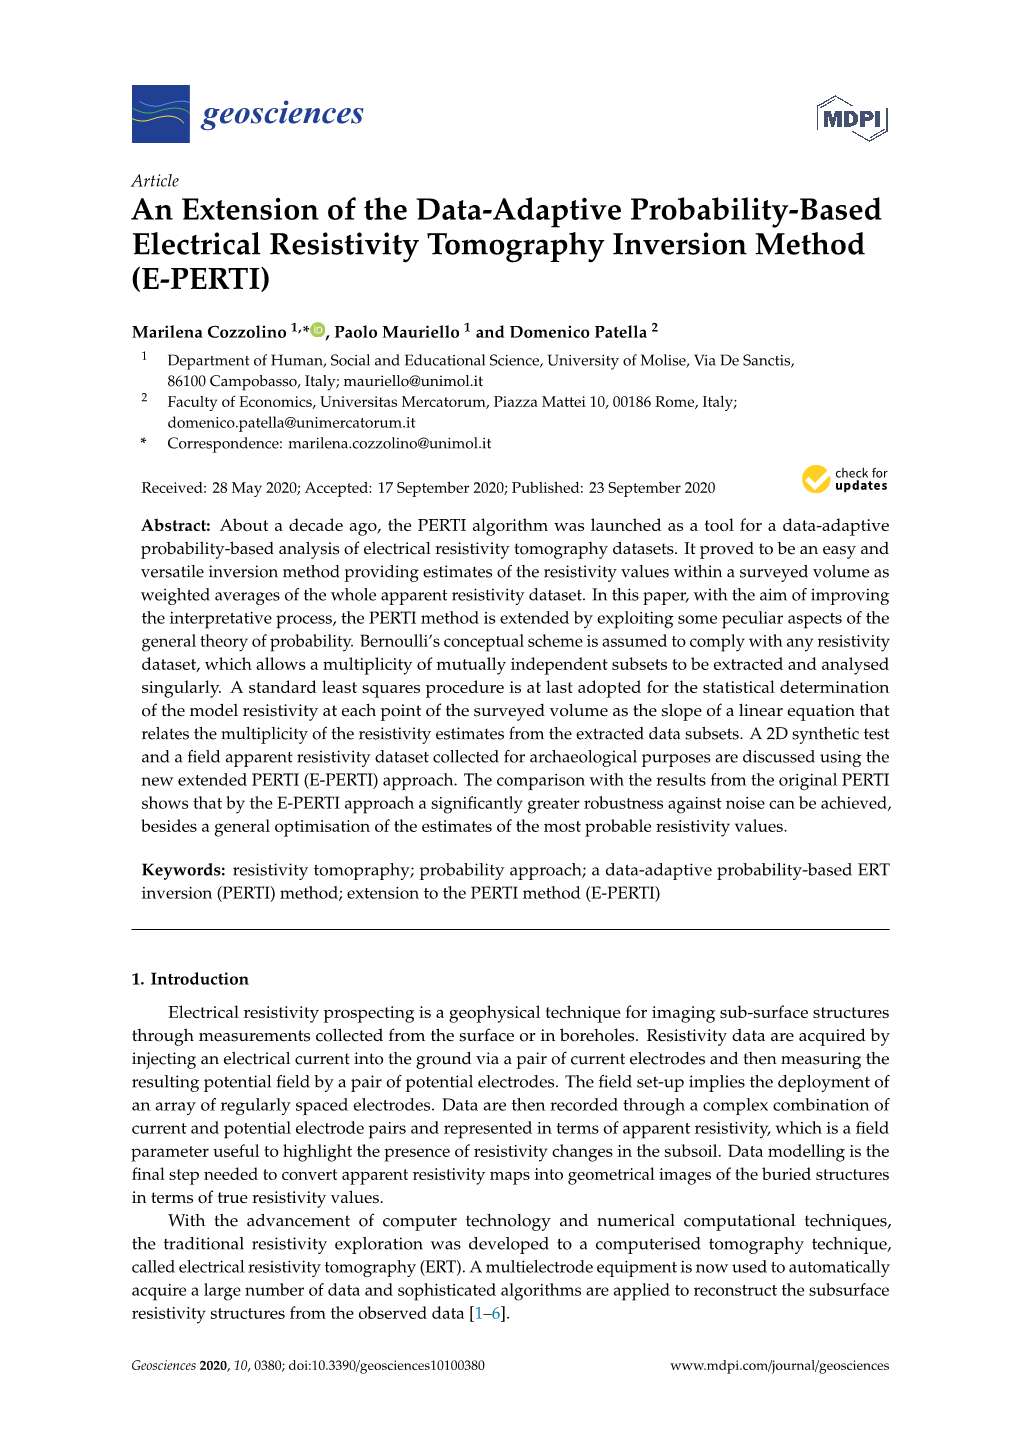 An Extension of the Data-Adaptive Probability-Based Electrical Resistivity Tomography Inversion Method (E-PERTI)